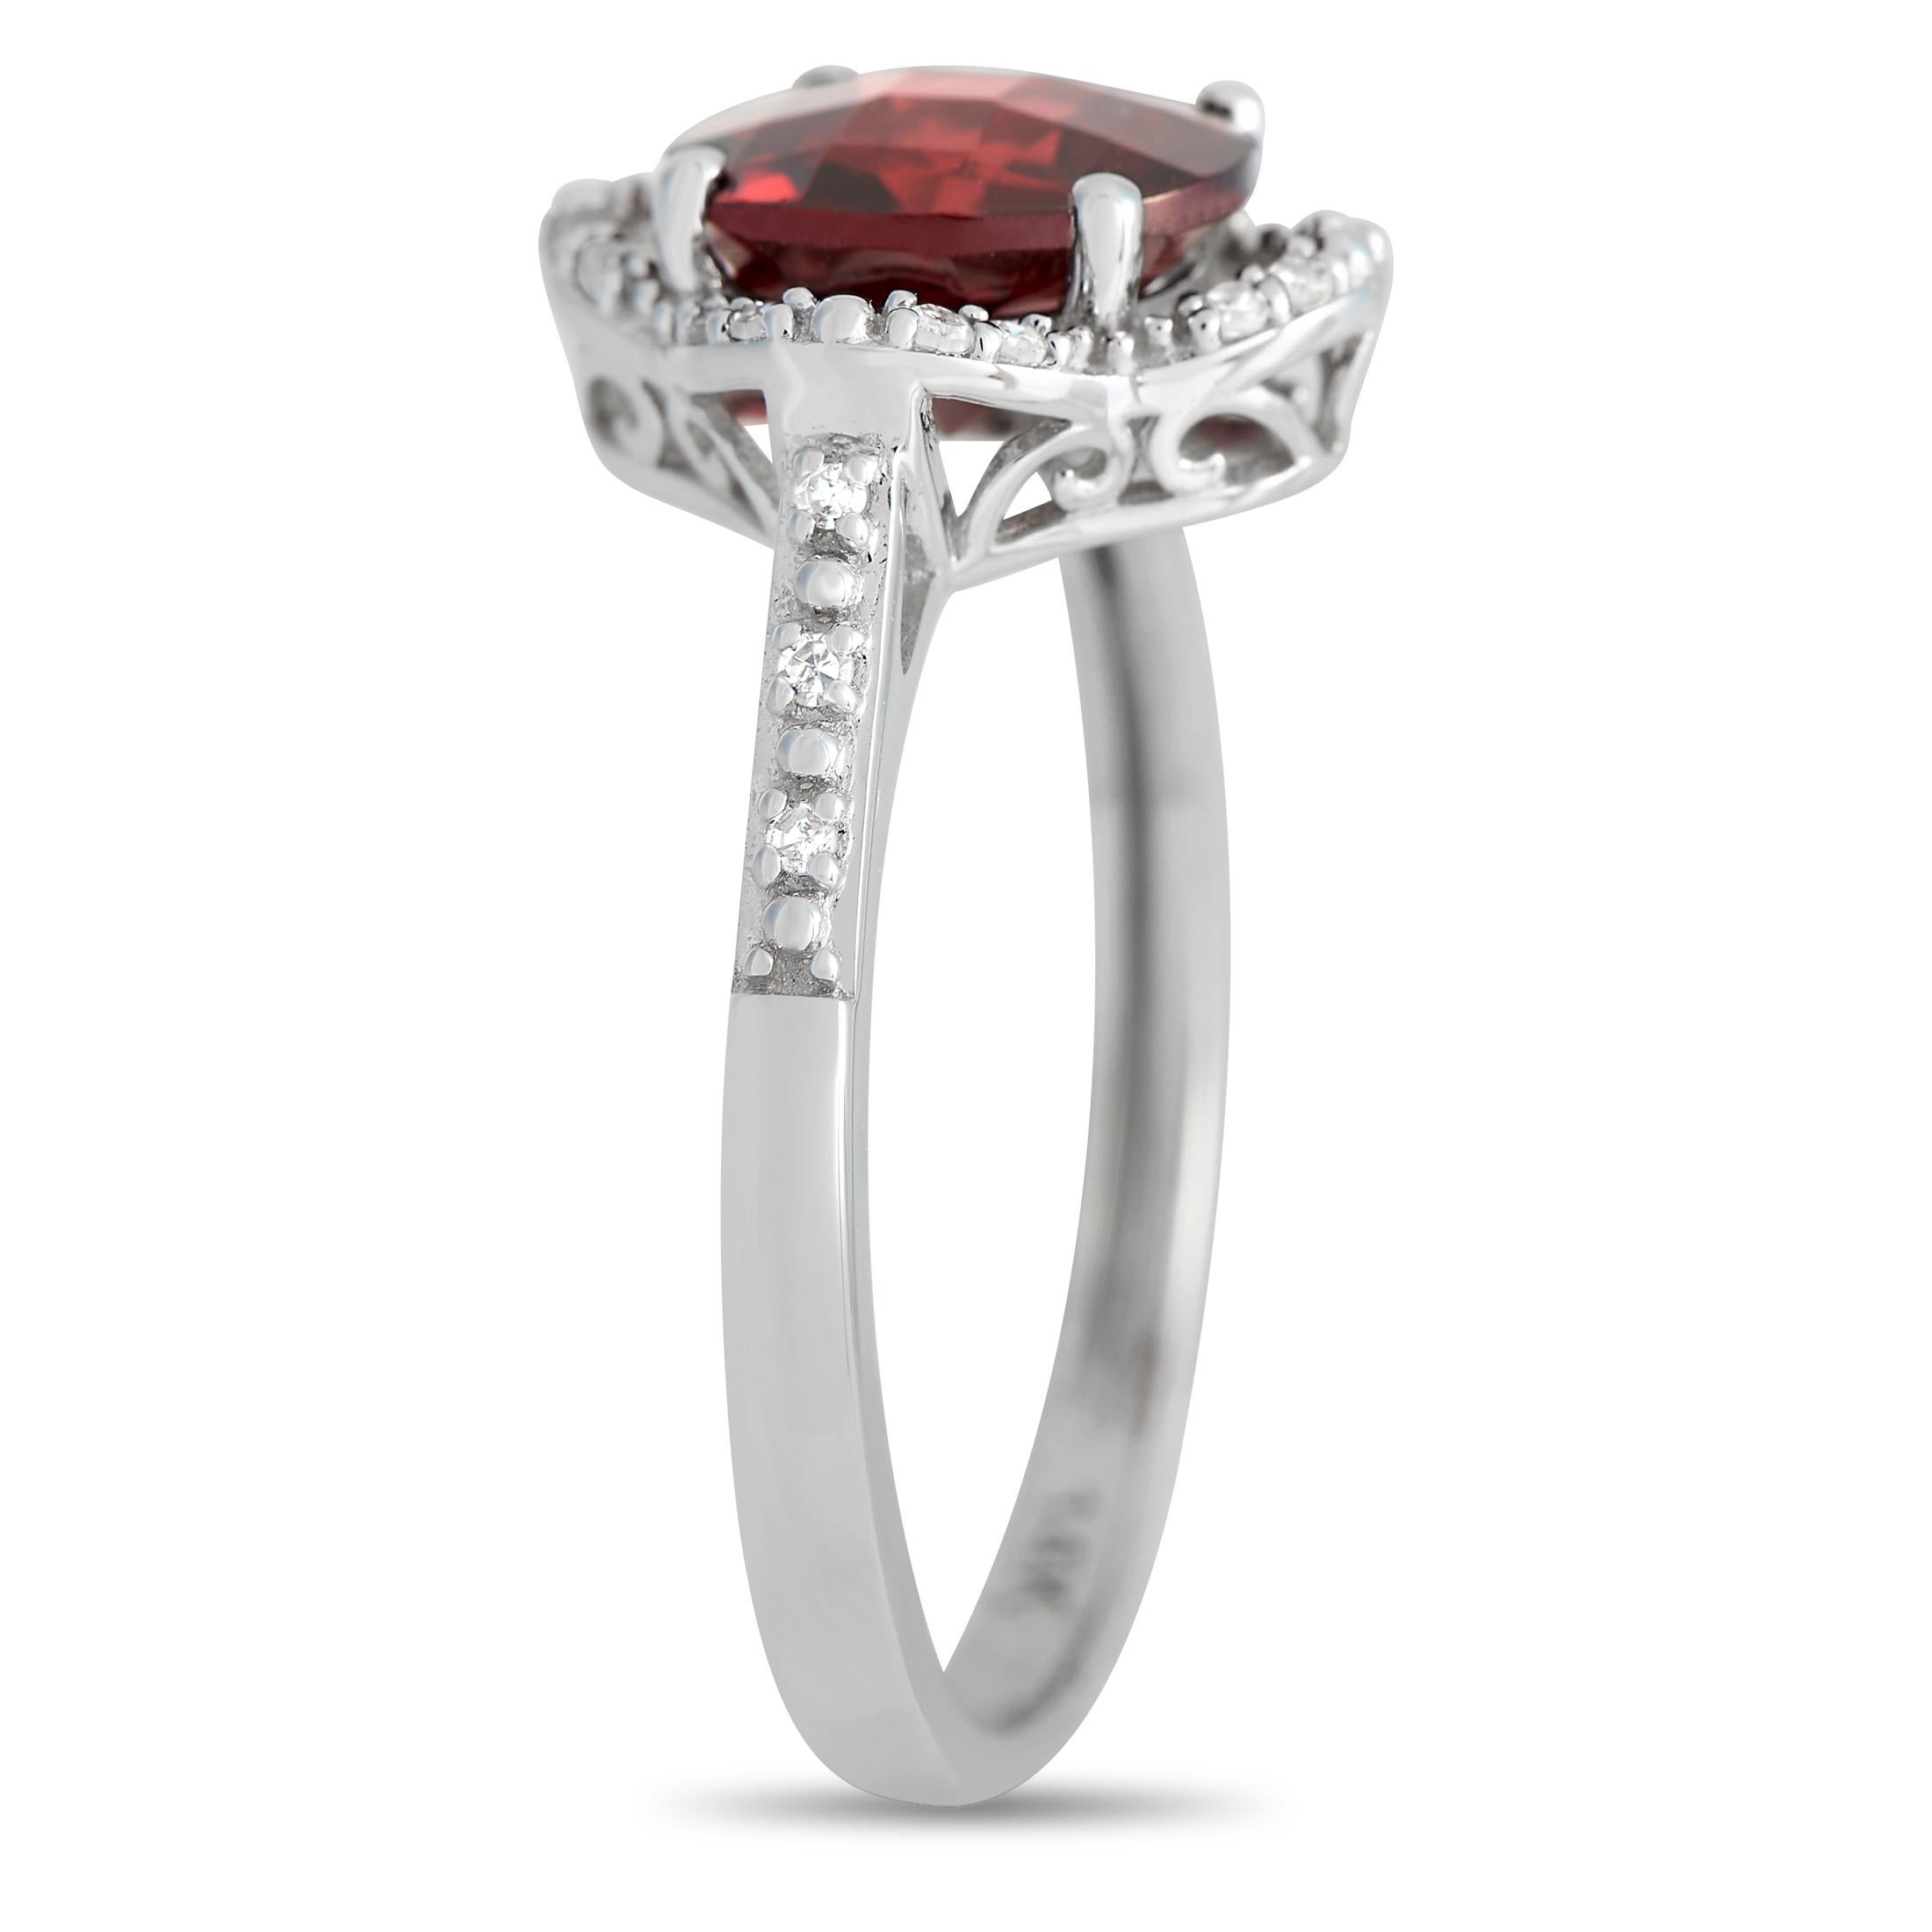 Embrace the symbolism of your birthstone in a chic and elegant way through this gemstone ring. It features a 14K white gold band with diamond-traced shoulders that lead to a diamond-lined and swirl-decorated quatrefoil setting. Sitting at the center